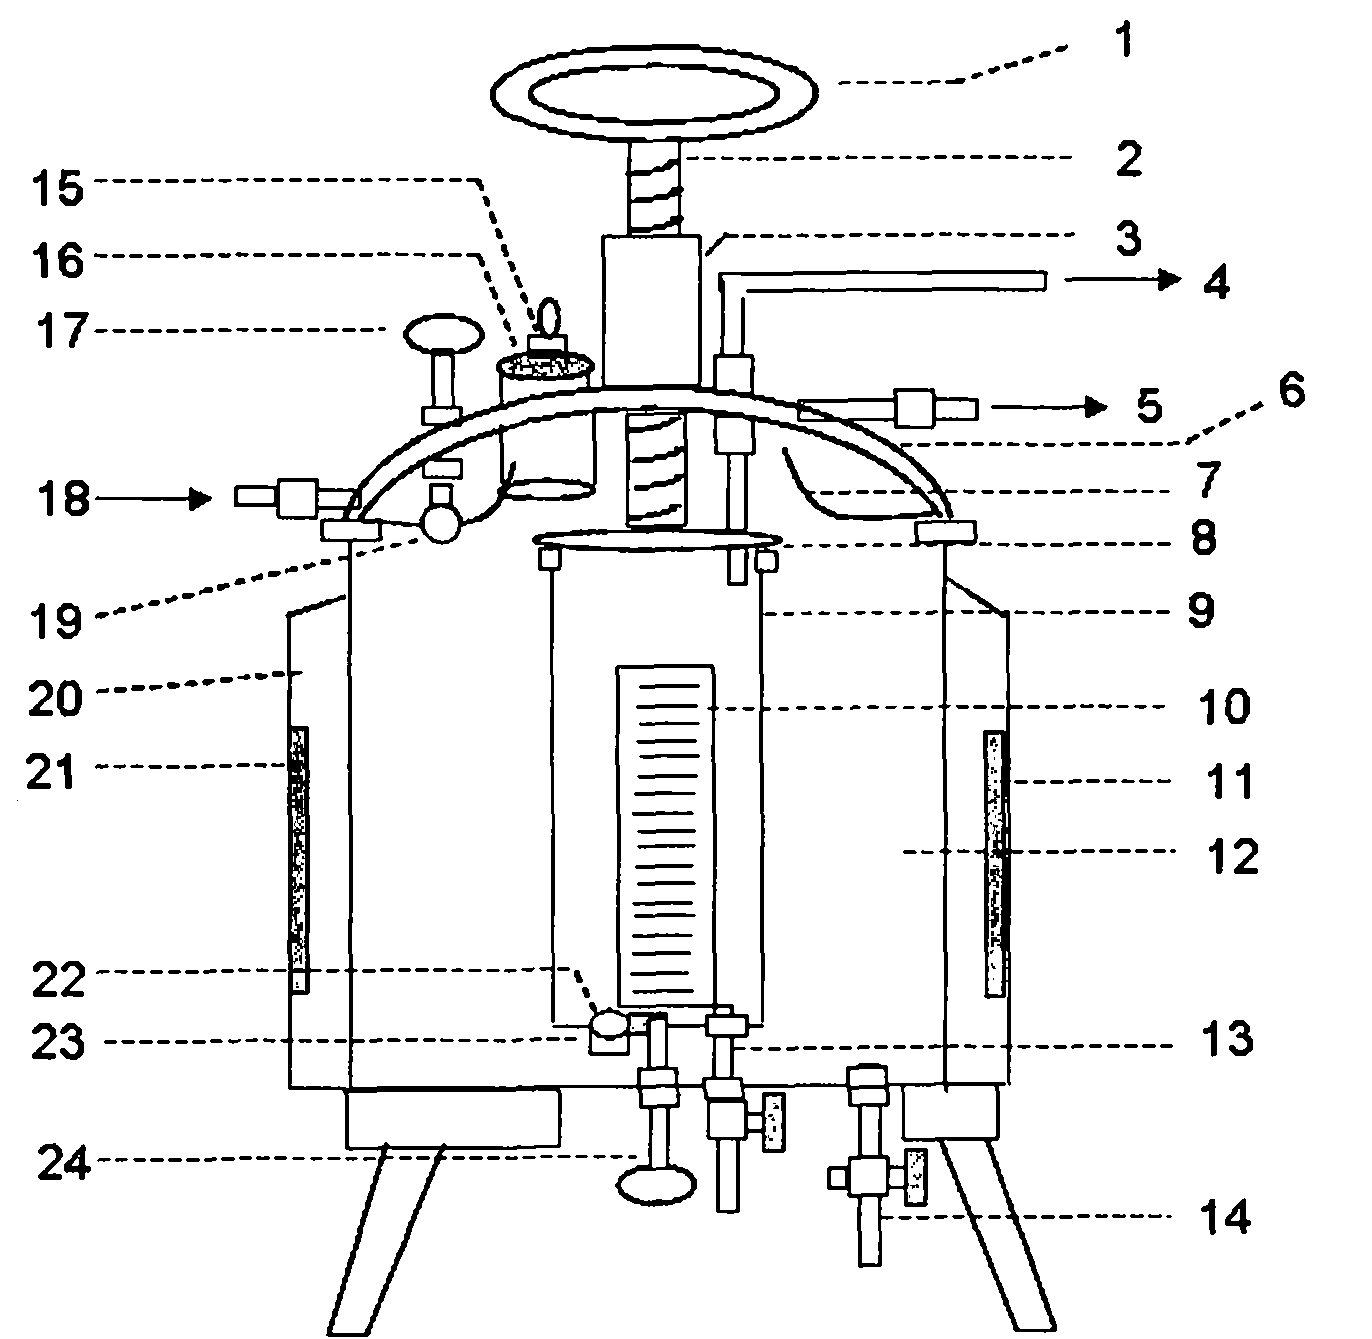 Common-pressure herb-decocting machine with internal vacuum condensing device and condensing cover